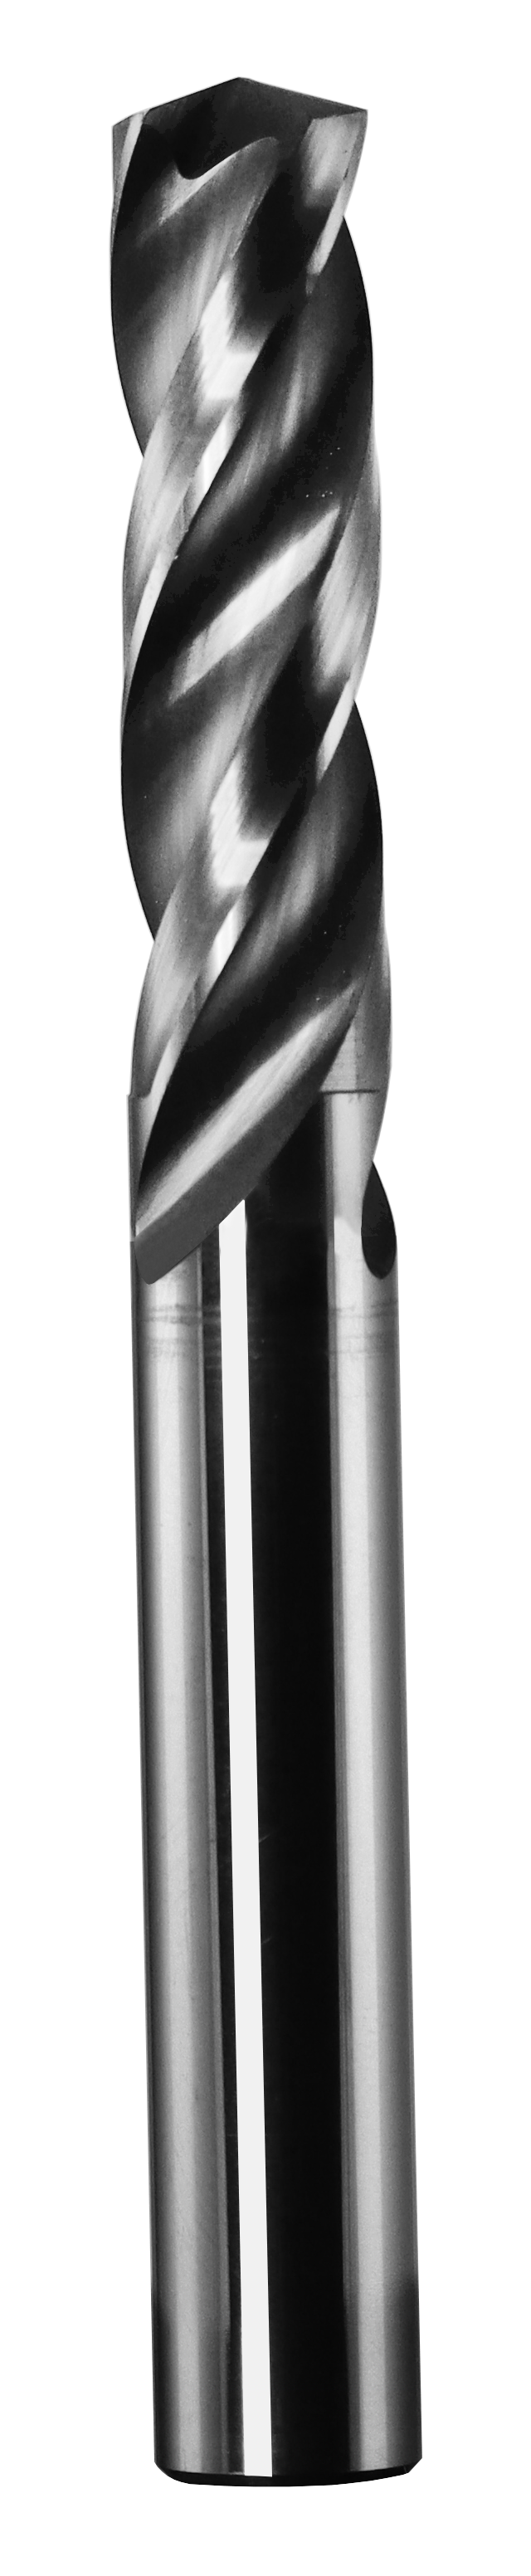 27/64" Dia, 150 Degree Point, Solid Carbide Drill - 53127